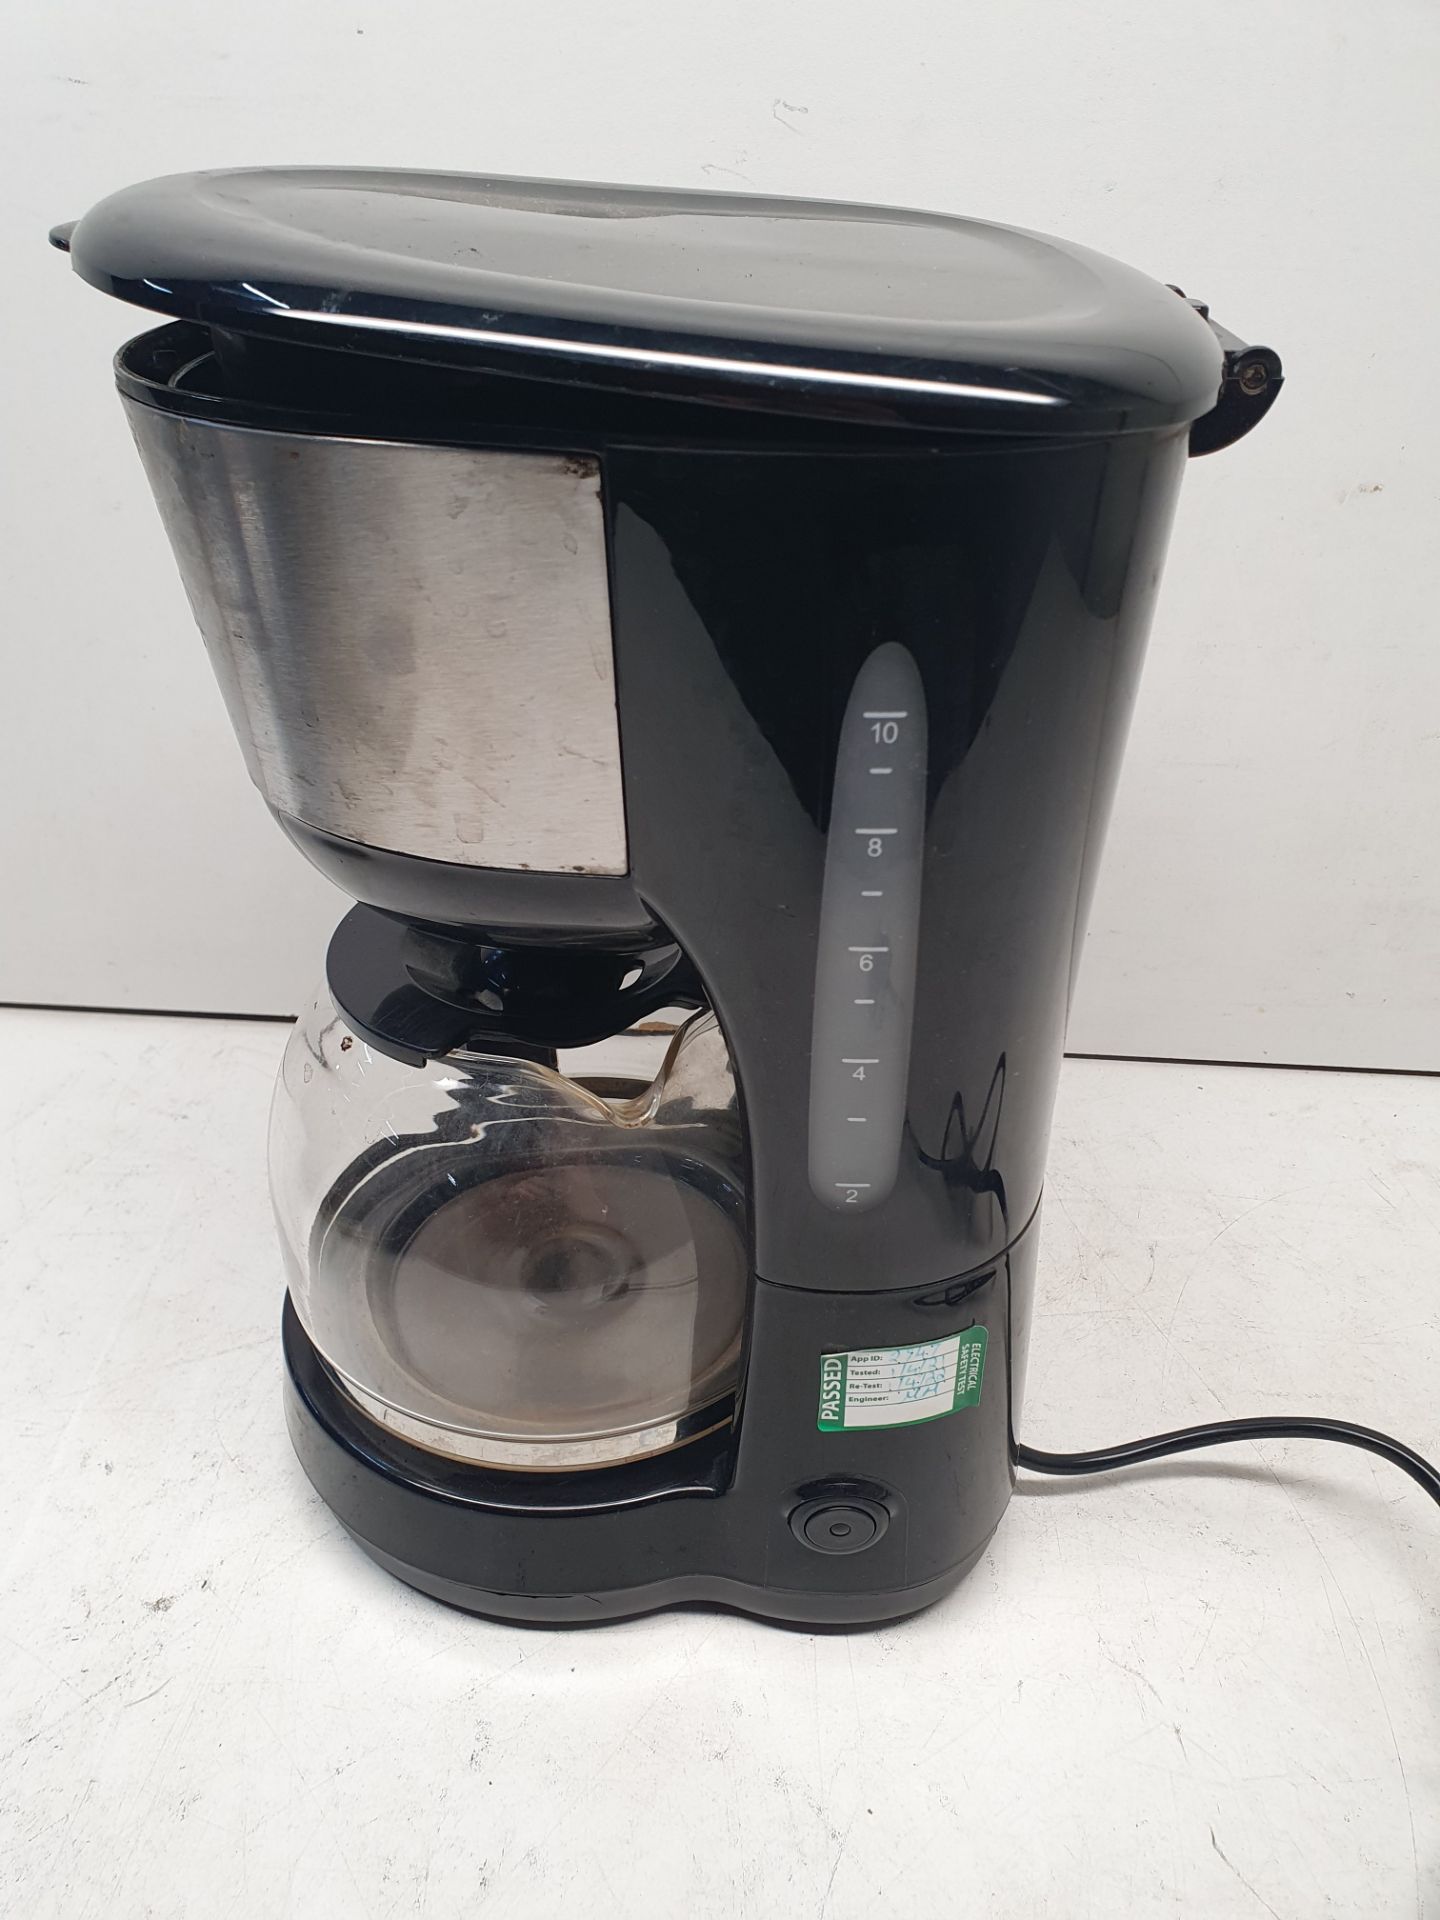 Tower T13001 10 Cup Coffee Maker with Keep Warm Function - Image 2 of 6